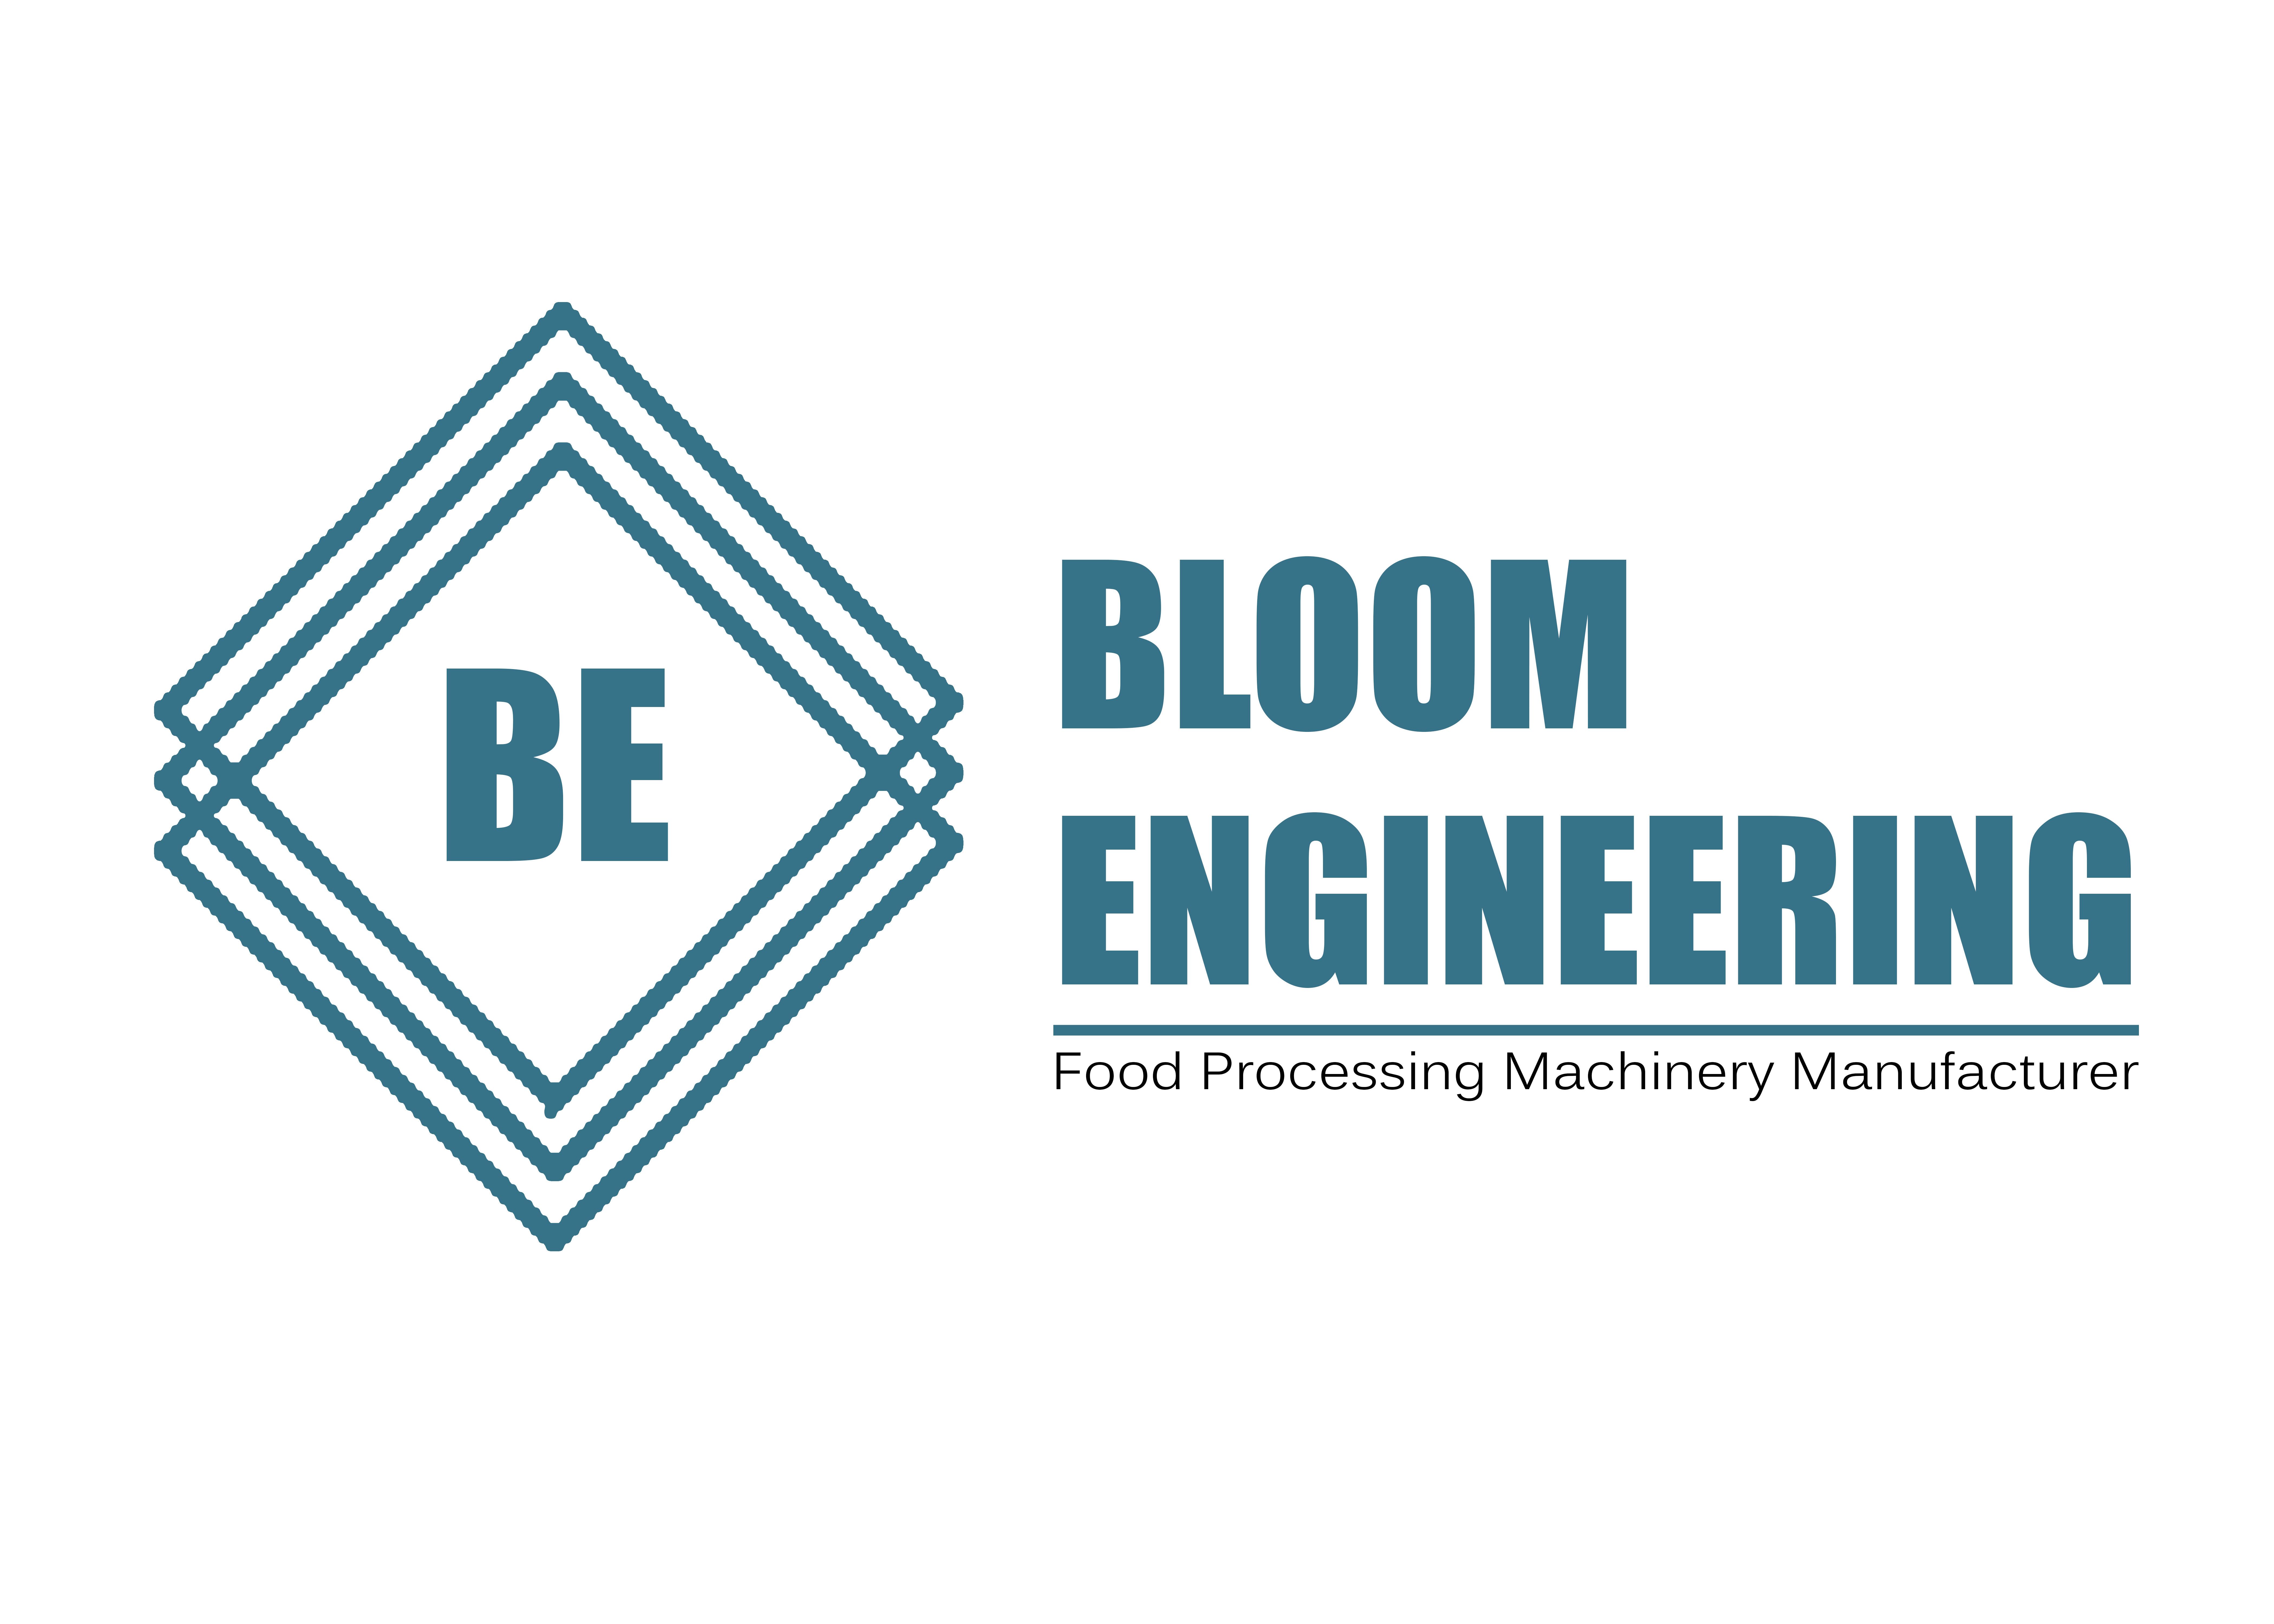 https://www.pakpositions.com/company/bloom-engineering